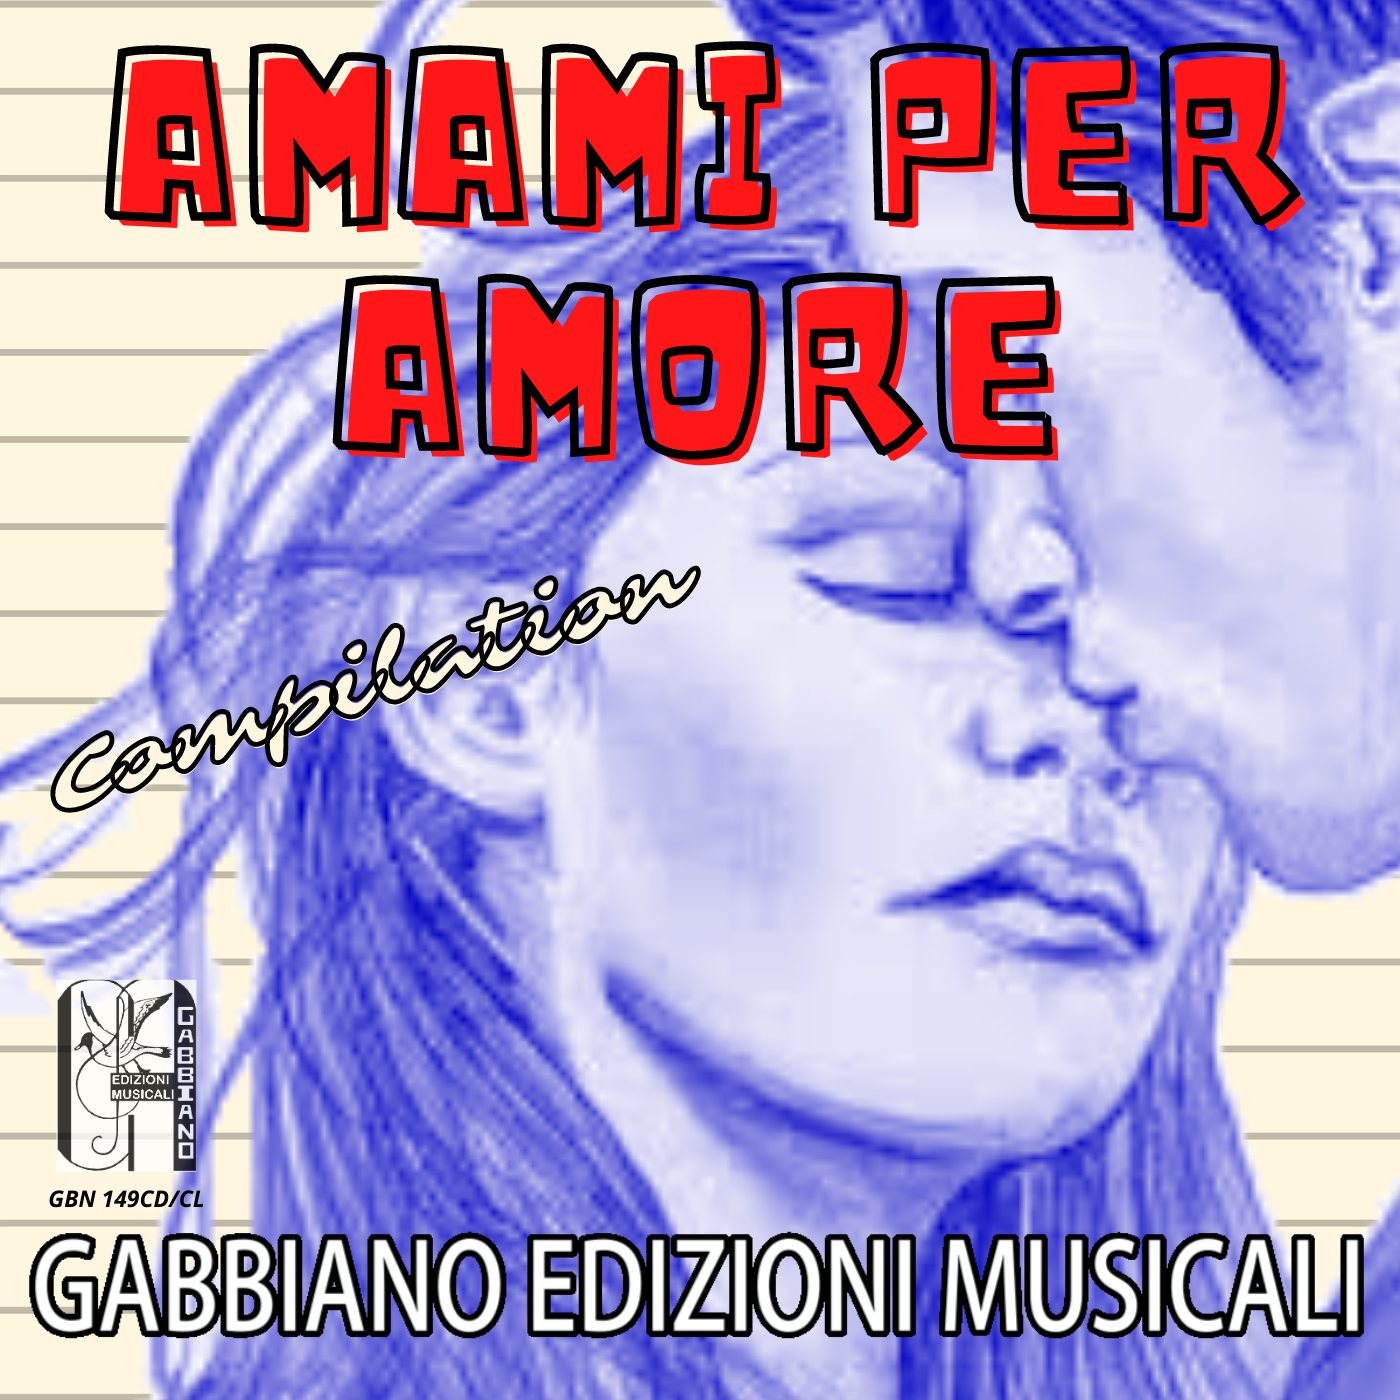 GBN149CD/CL - AMAMI PER AMORE (Compilation) - Volume 47